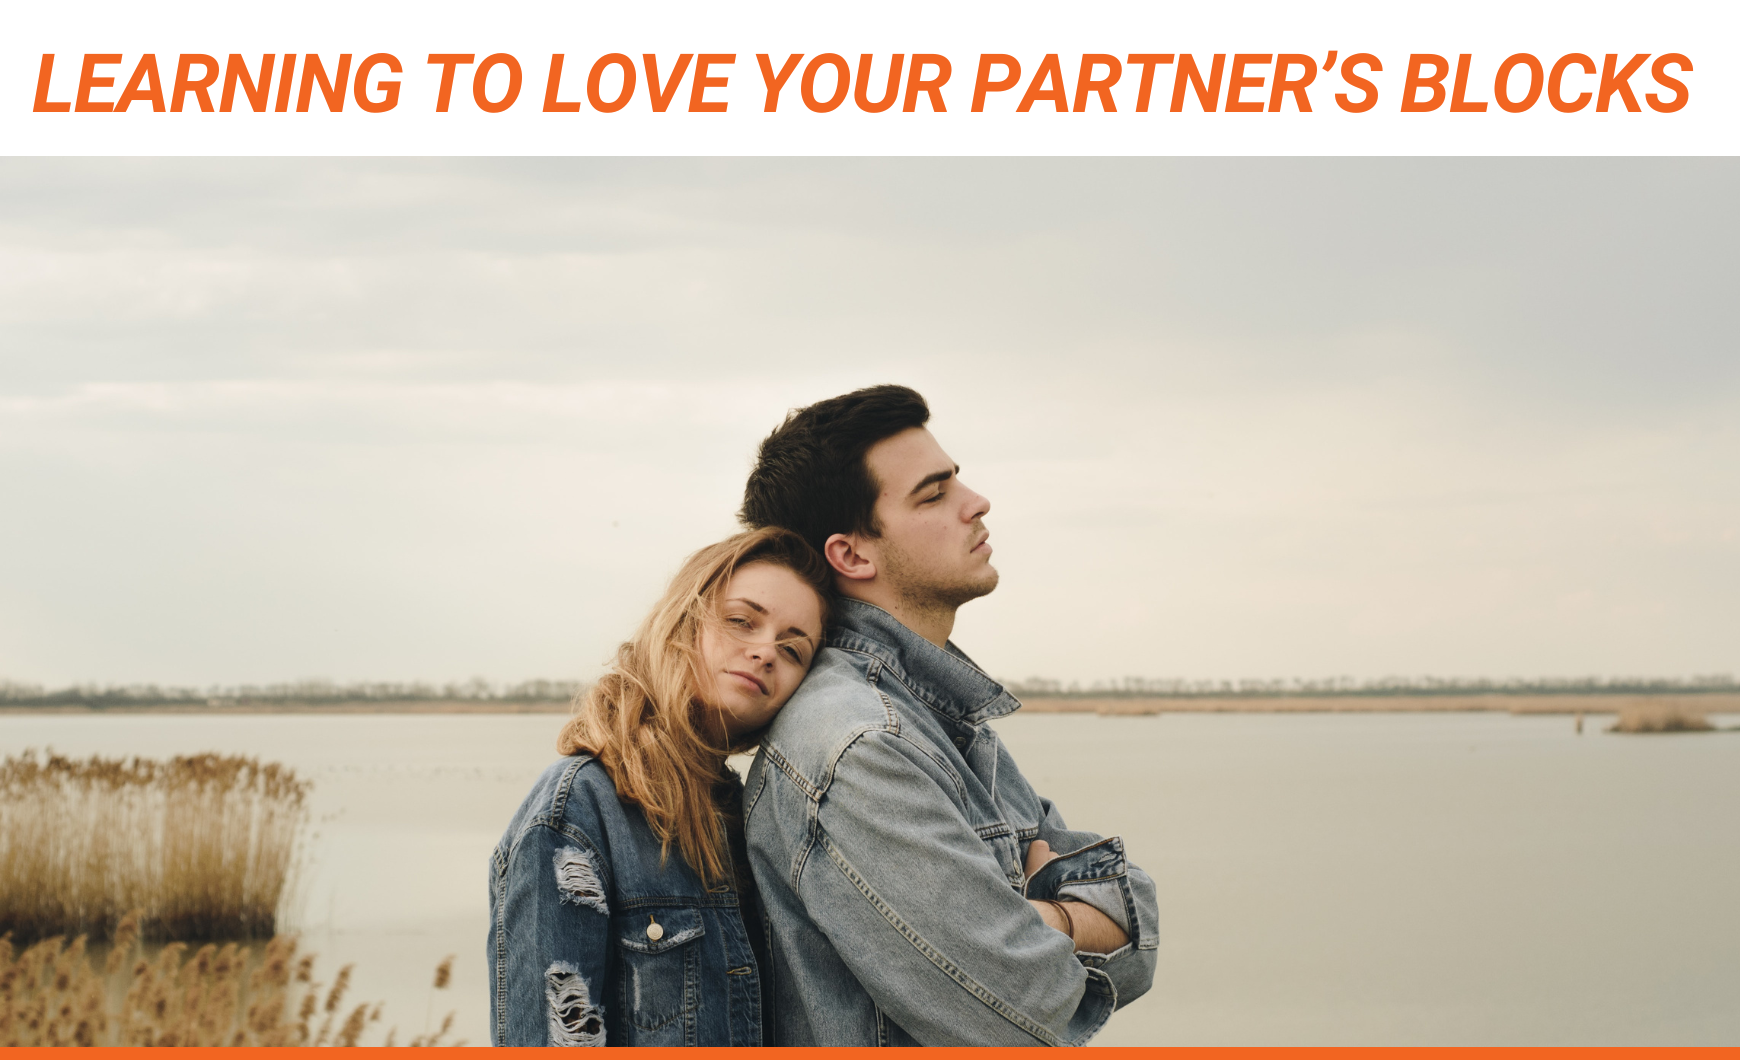 Orange text that reads "Learning to Love Your Partner’s Blocks" above a stock photo of a white heterosexual couple standing on the edge of a body of water. Both are wearing denim jackets. The woman is behind the man, leaning on his back, and he's facing away from her.